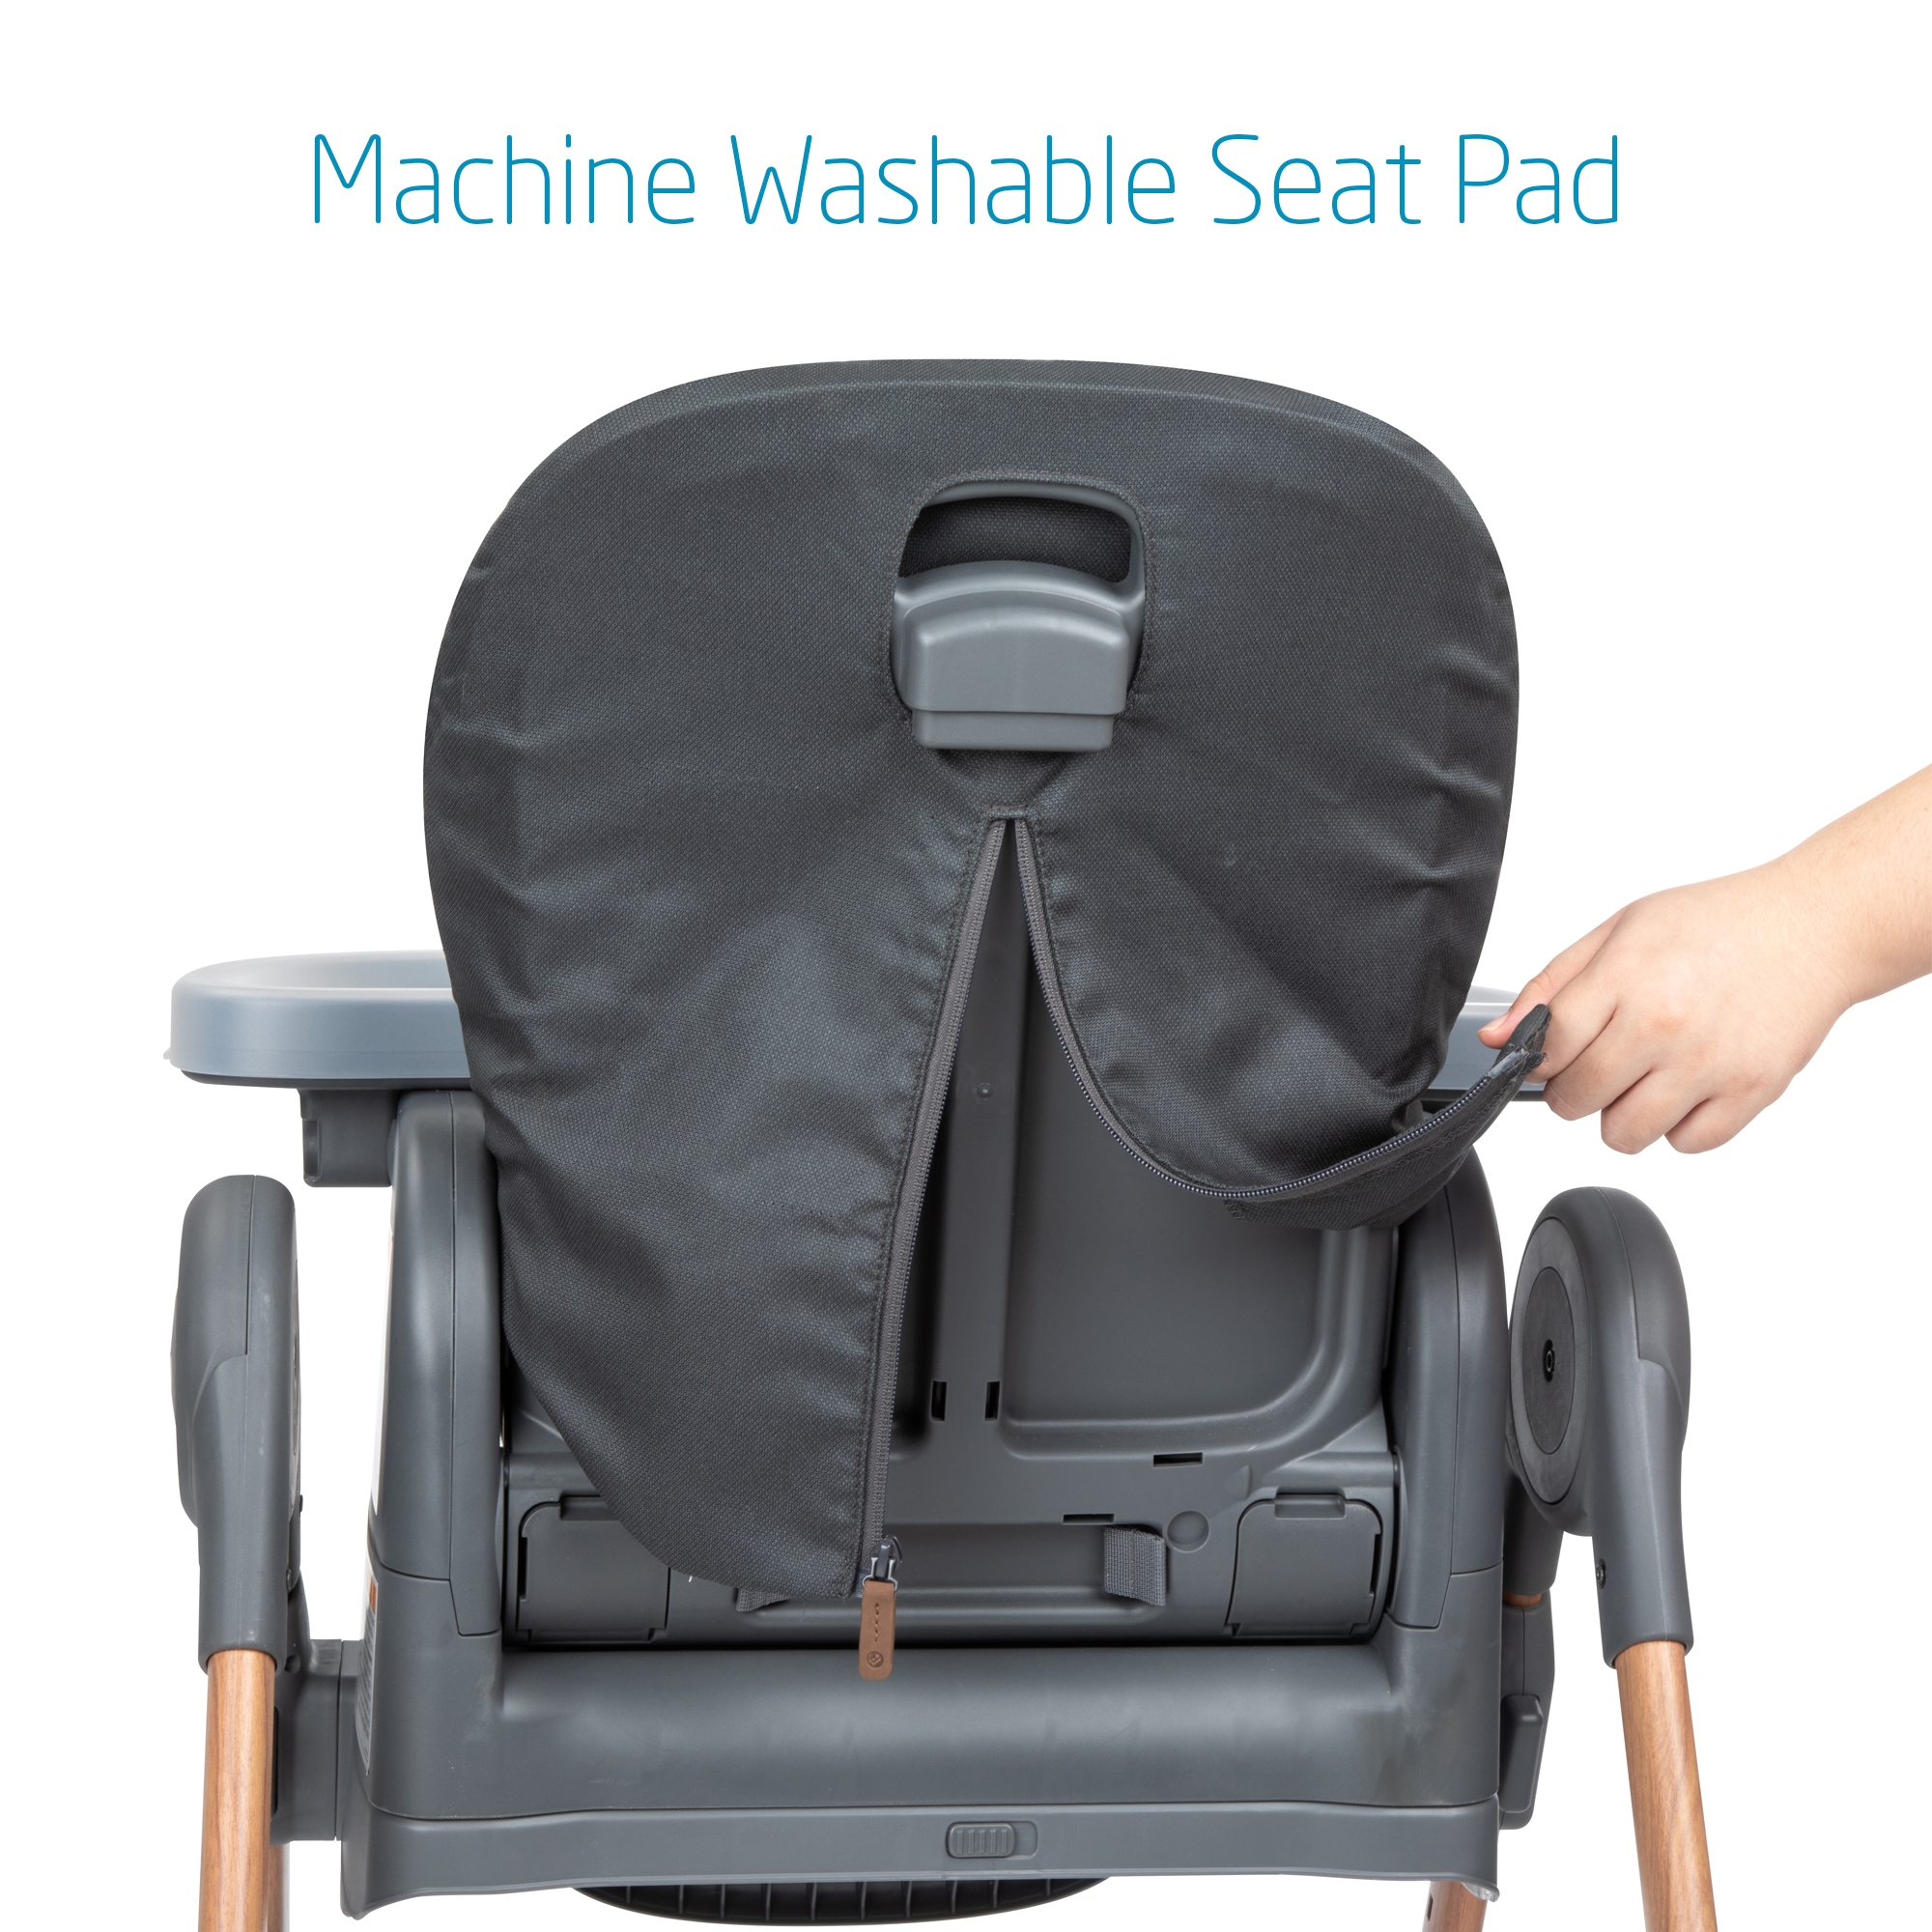 Parent demonstrating machine washable seat pad on high chair.